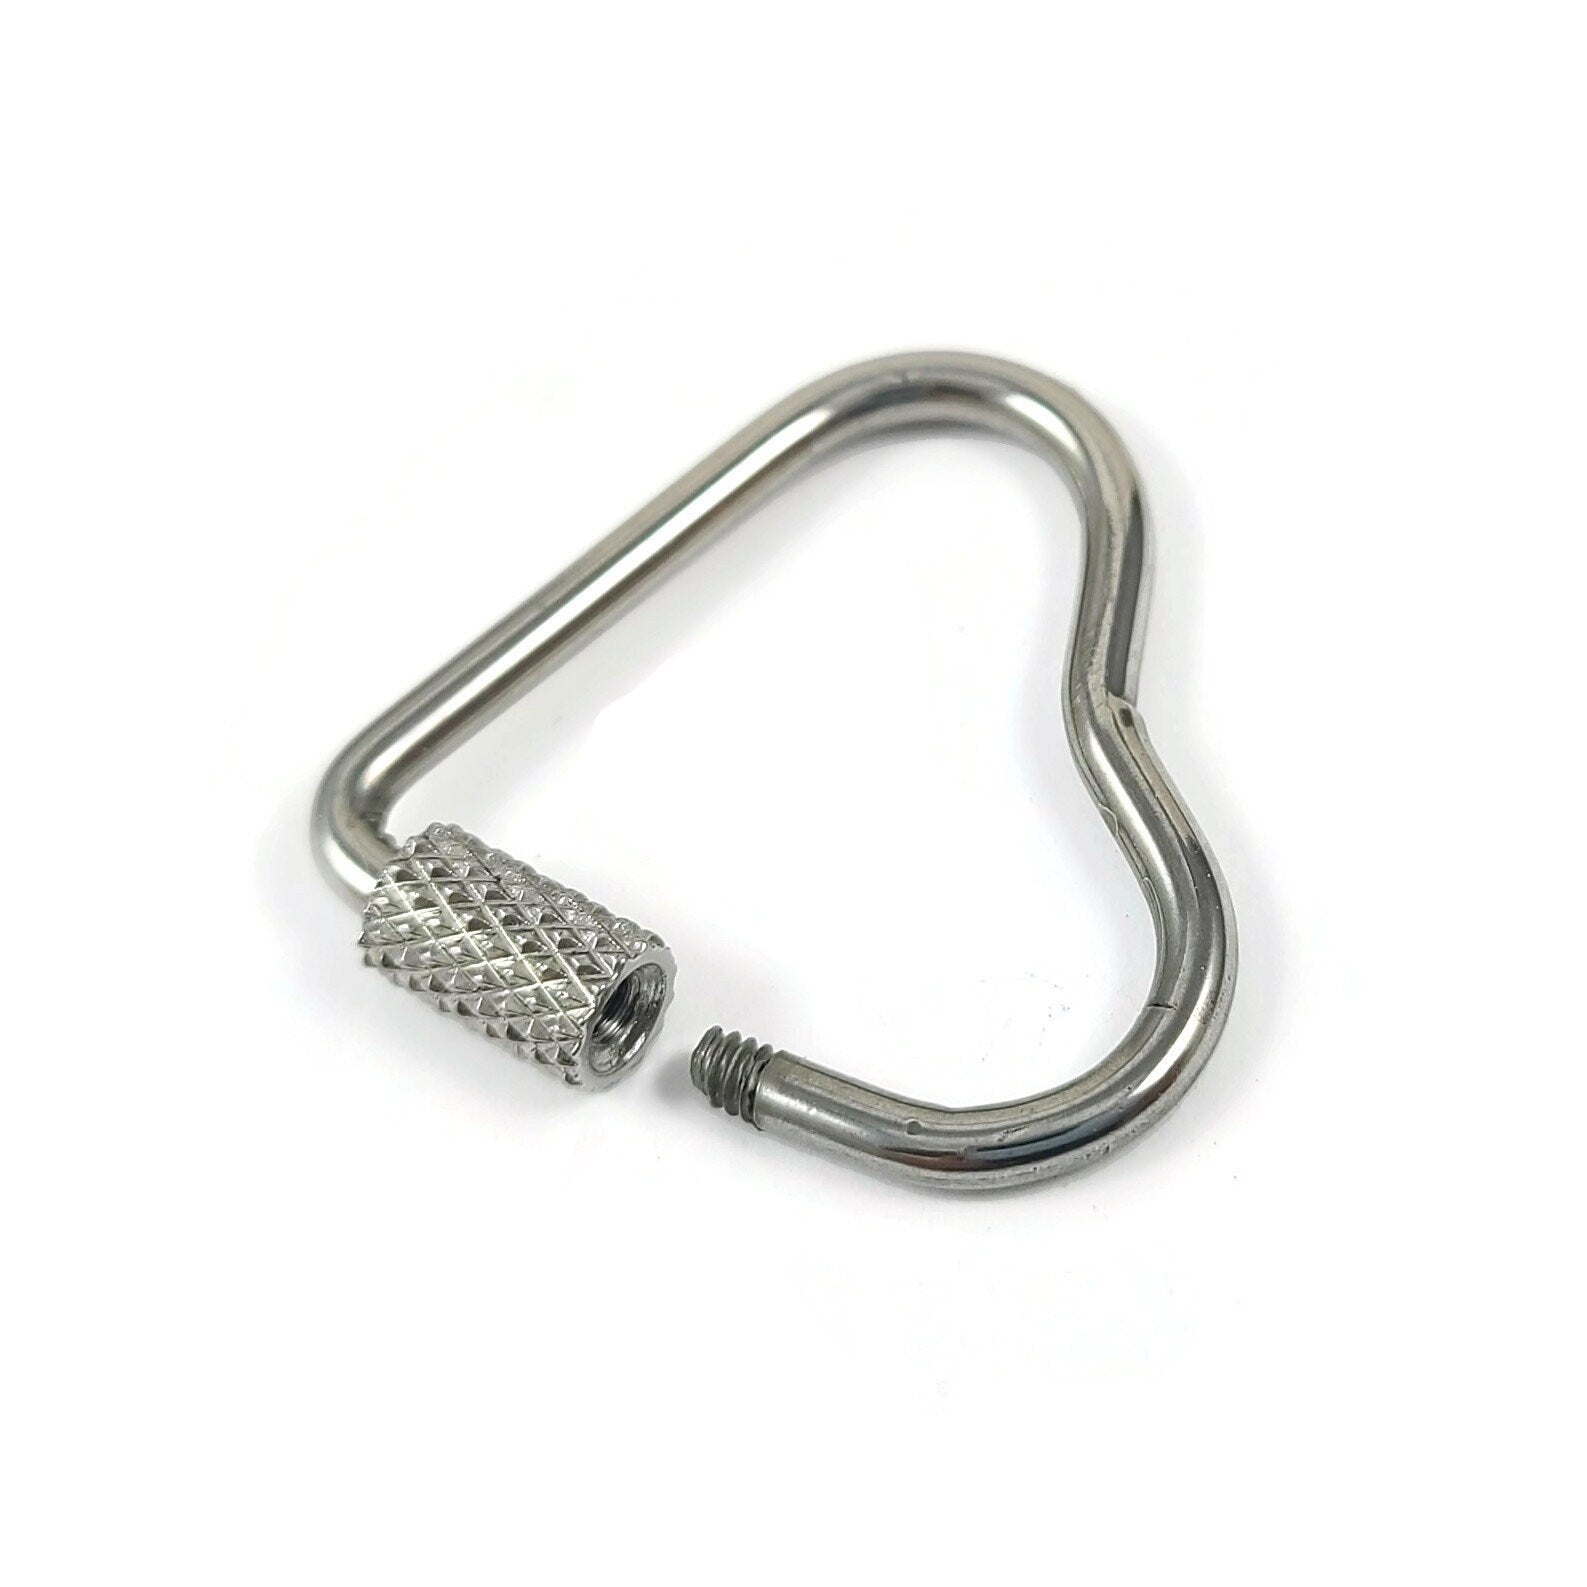 Heart carabiner, Stainless steel clasp, Charm or connector necklace making, Bottle clip & key fob findings